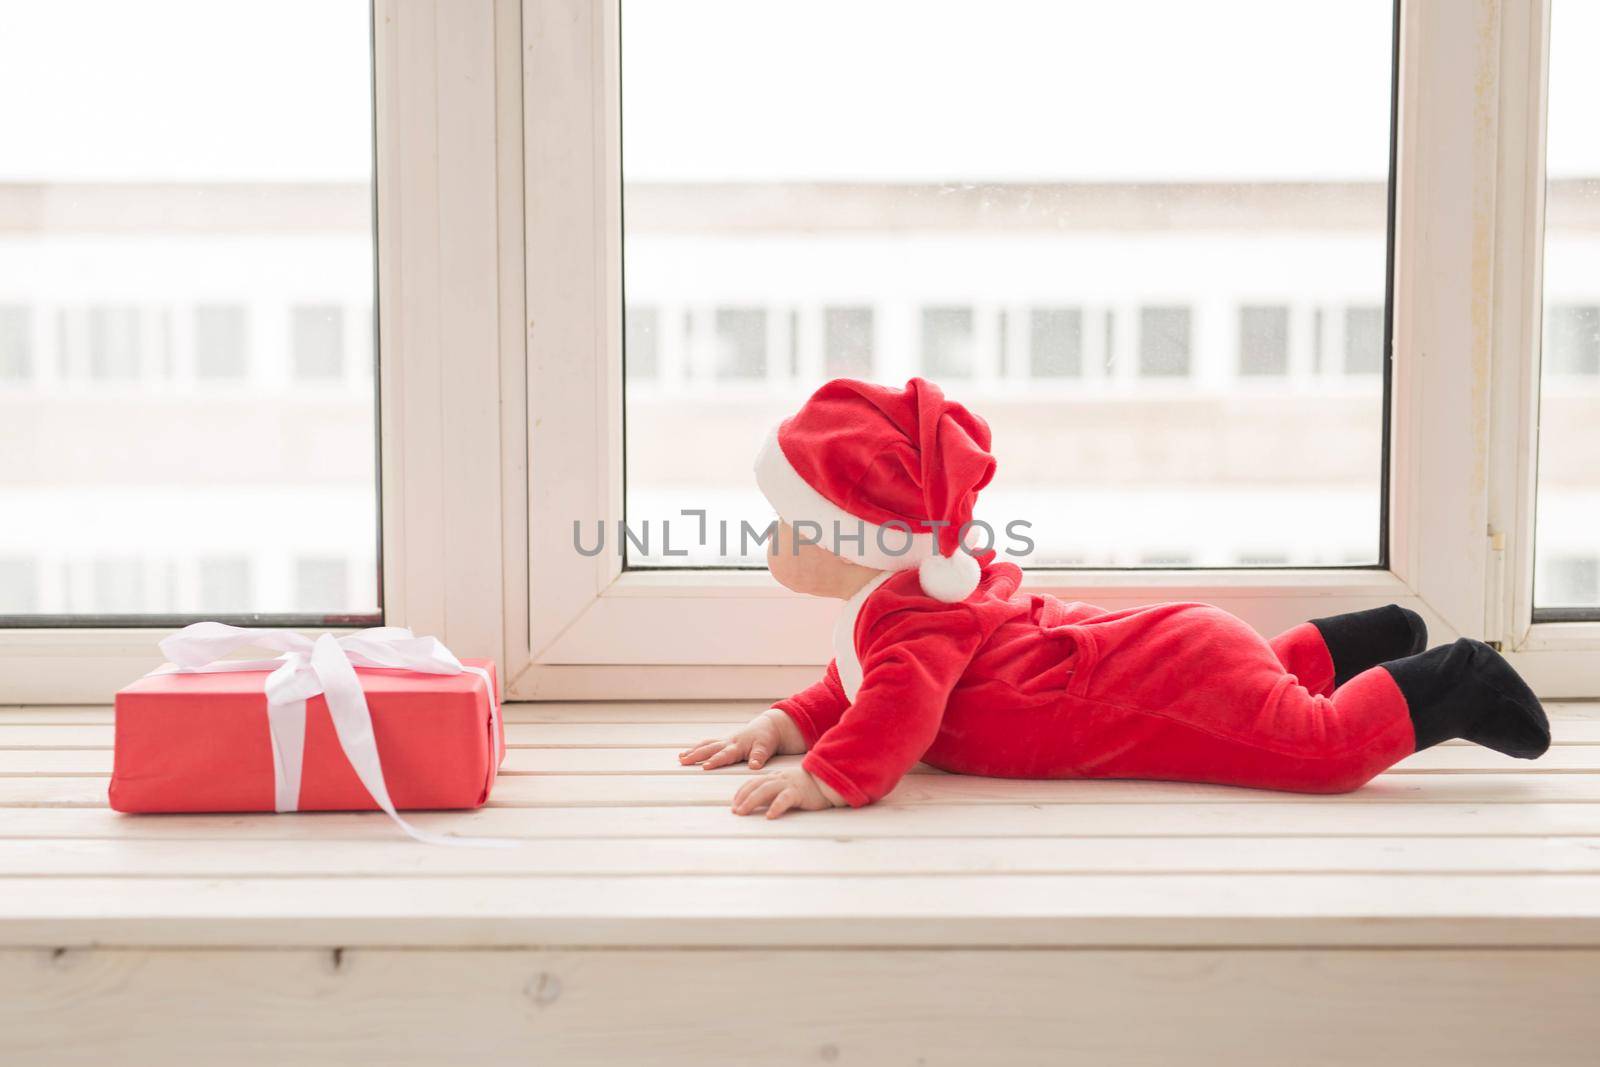 Beautiful little baby celebrates Christmas. New Year's holidays. Baby in a Christmas costume and in santa hat by Satura86